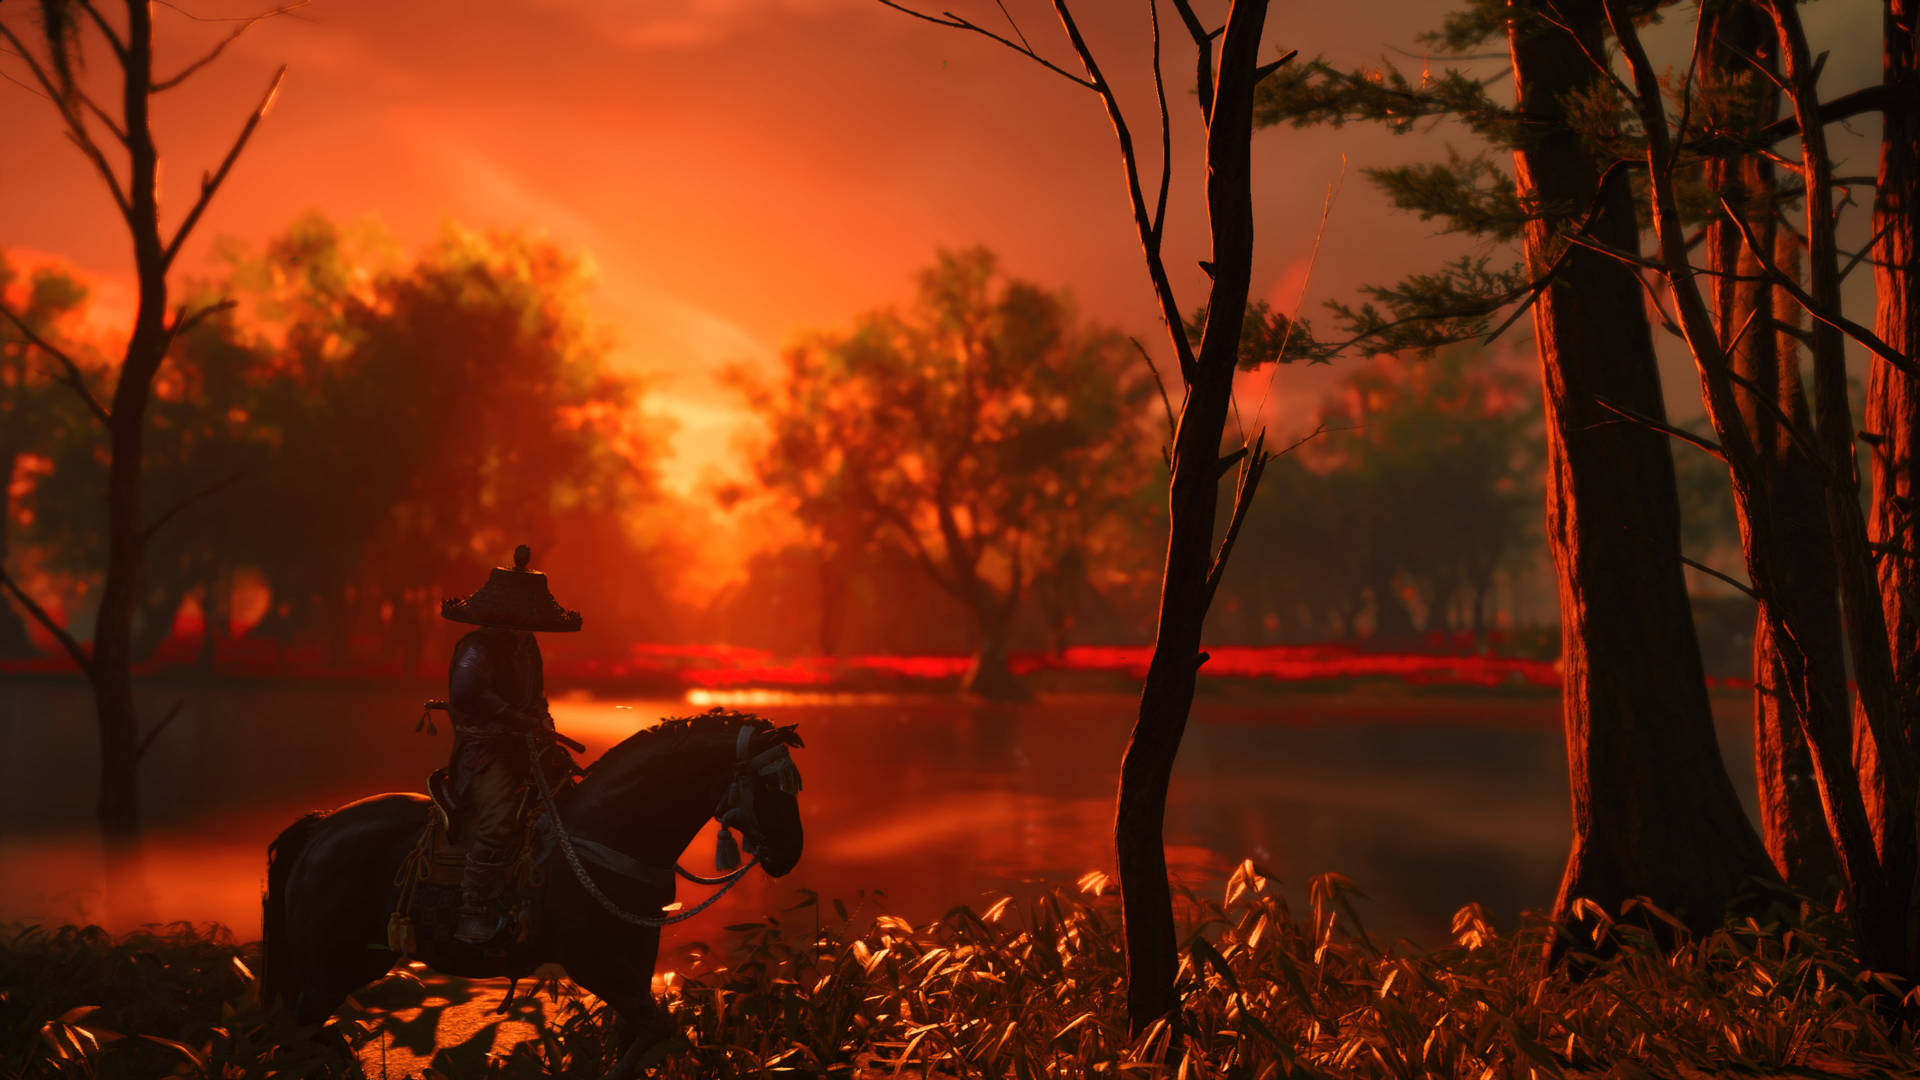 Ghost Of Tsushima Golden Hour Photography Wallpaper